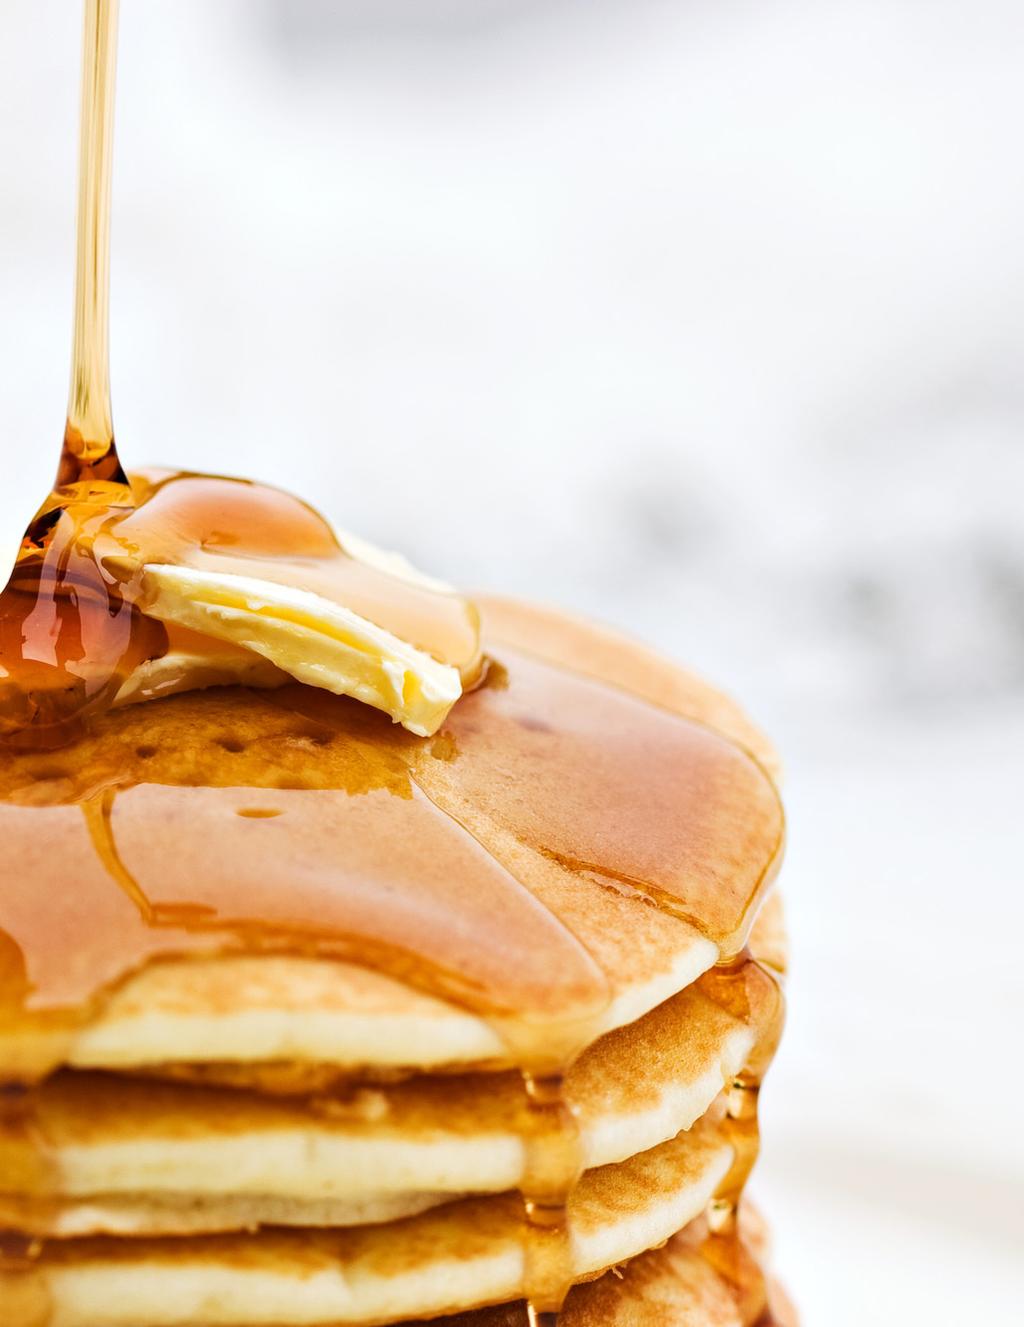 FAT TUESDAY Pancake & Sausage Supper Tuesday, February 13 th 5:30-8PM Join us for pancakes and all the fixins